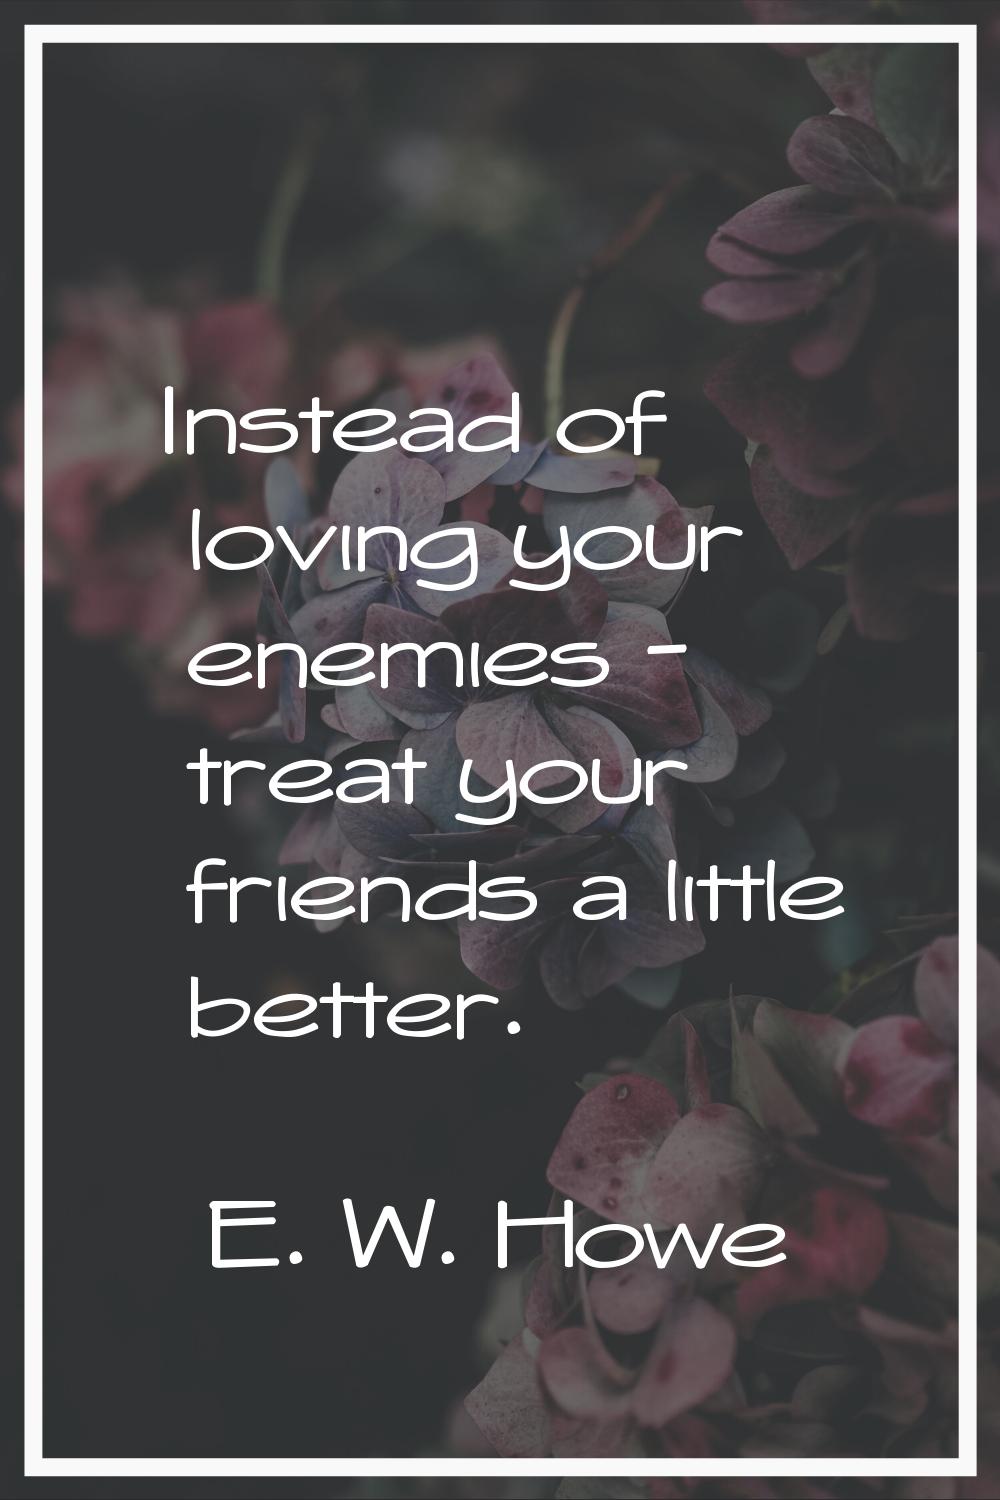 Instead of loving your enemies - treat your friends a little better.